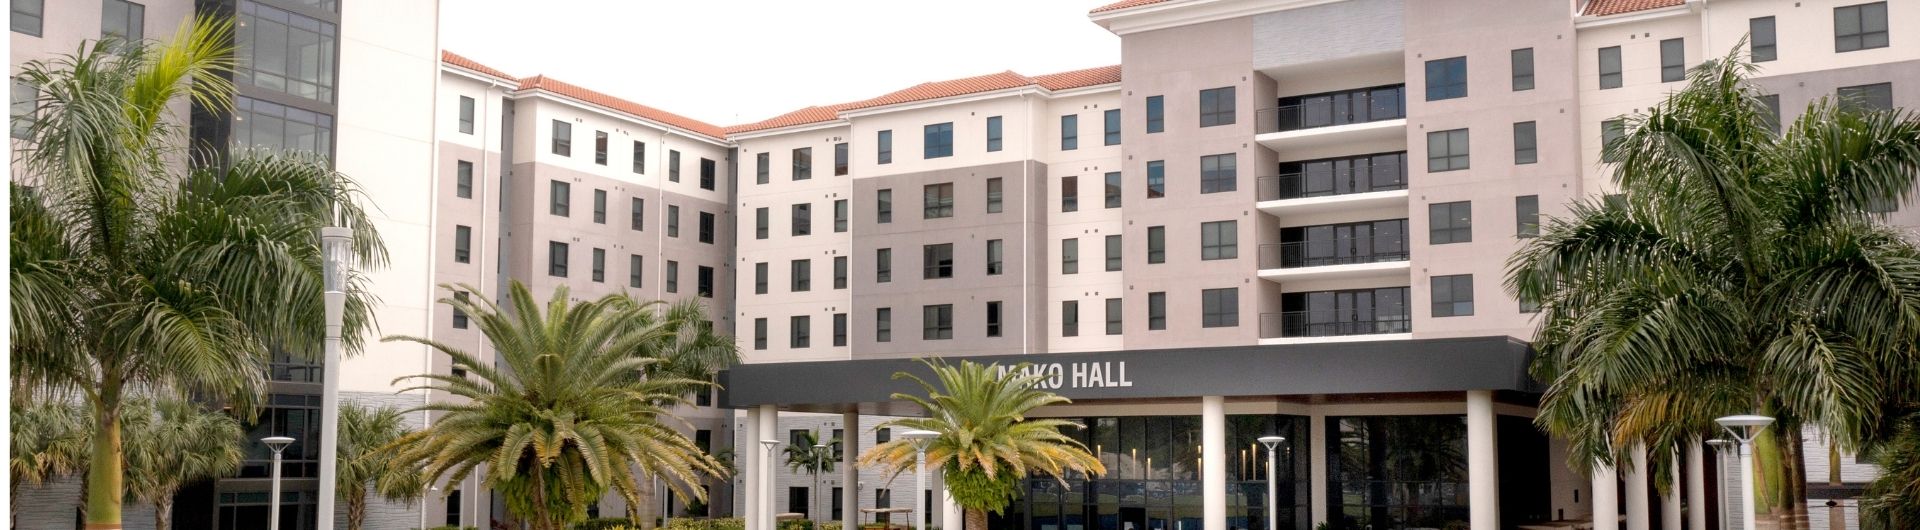 An exterior view of Mako Hall adorned by lean landscaping and healthy palms.